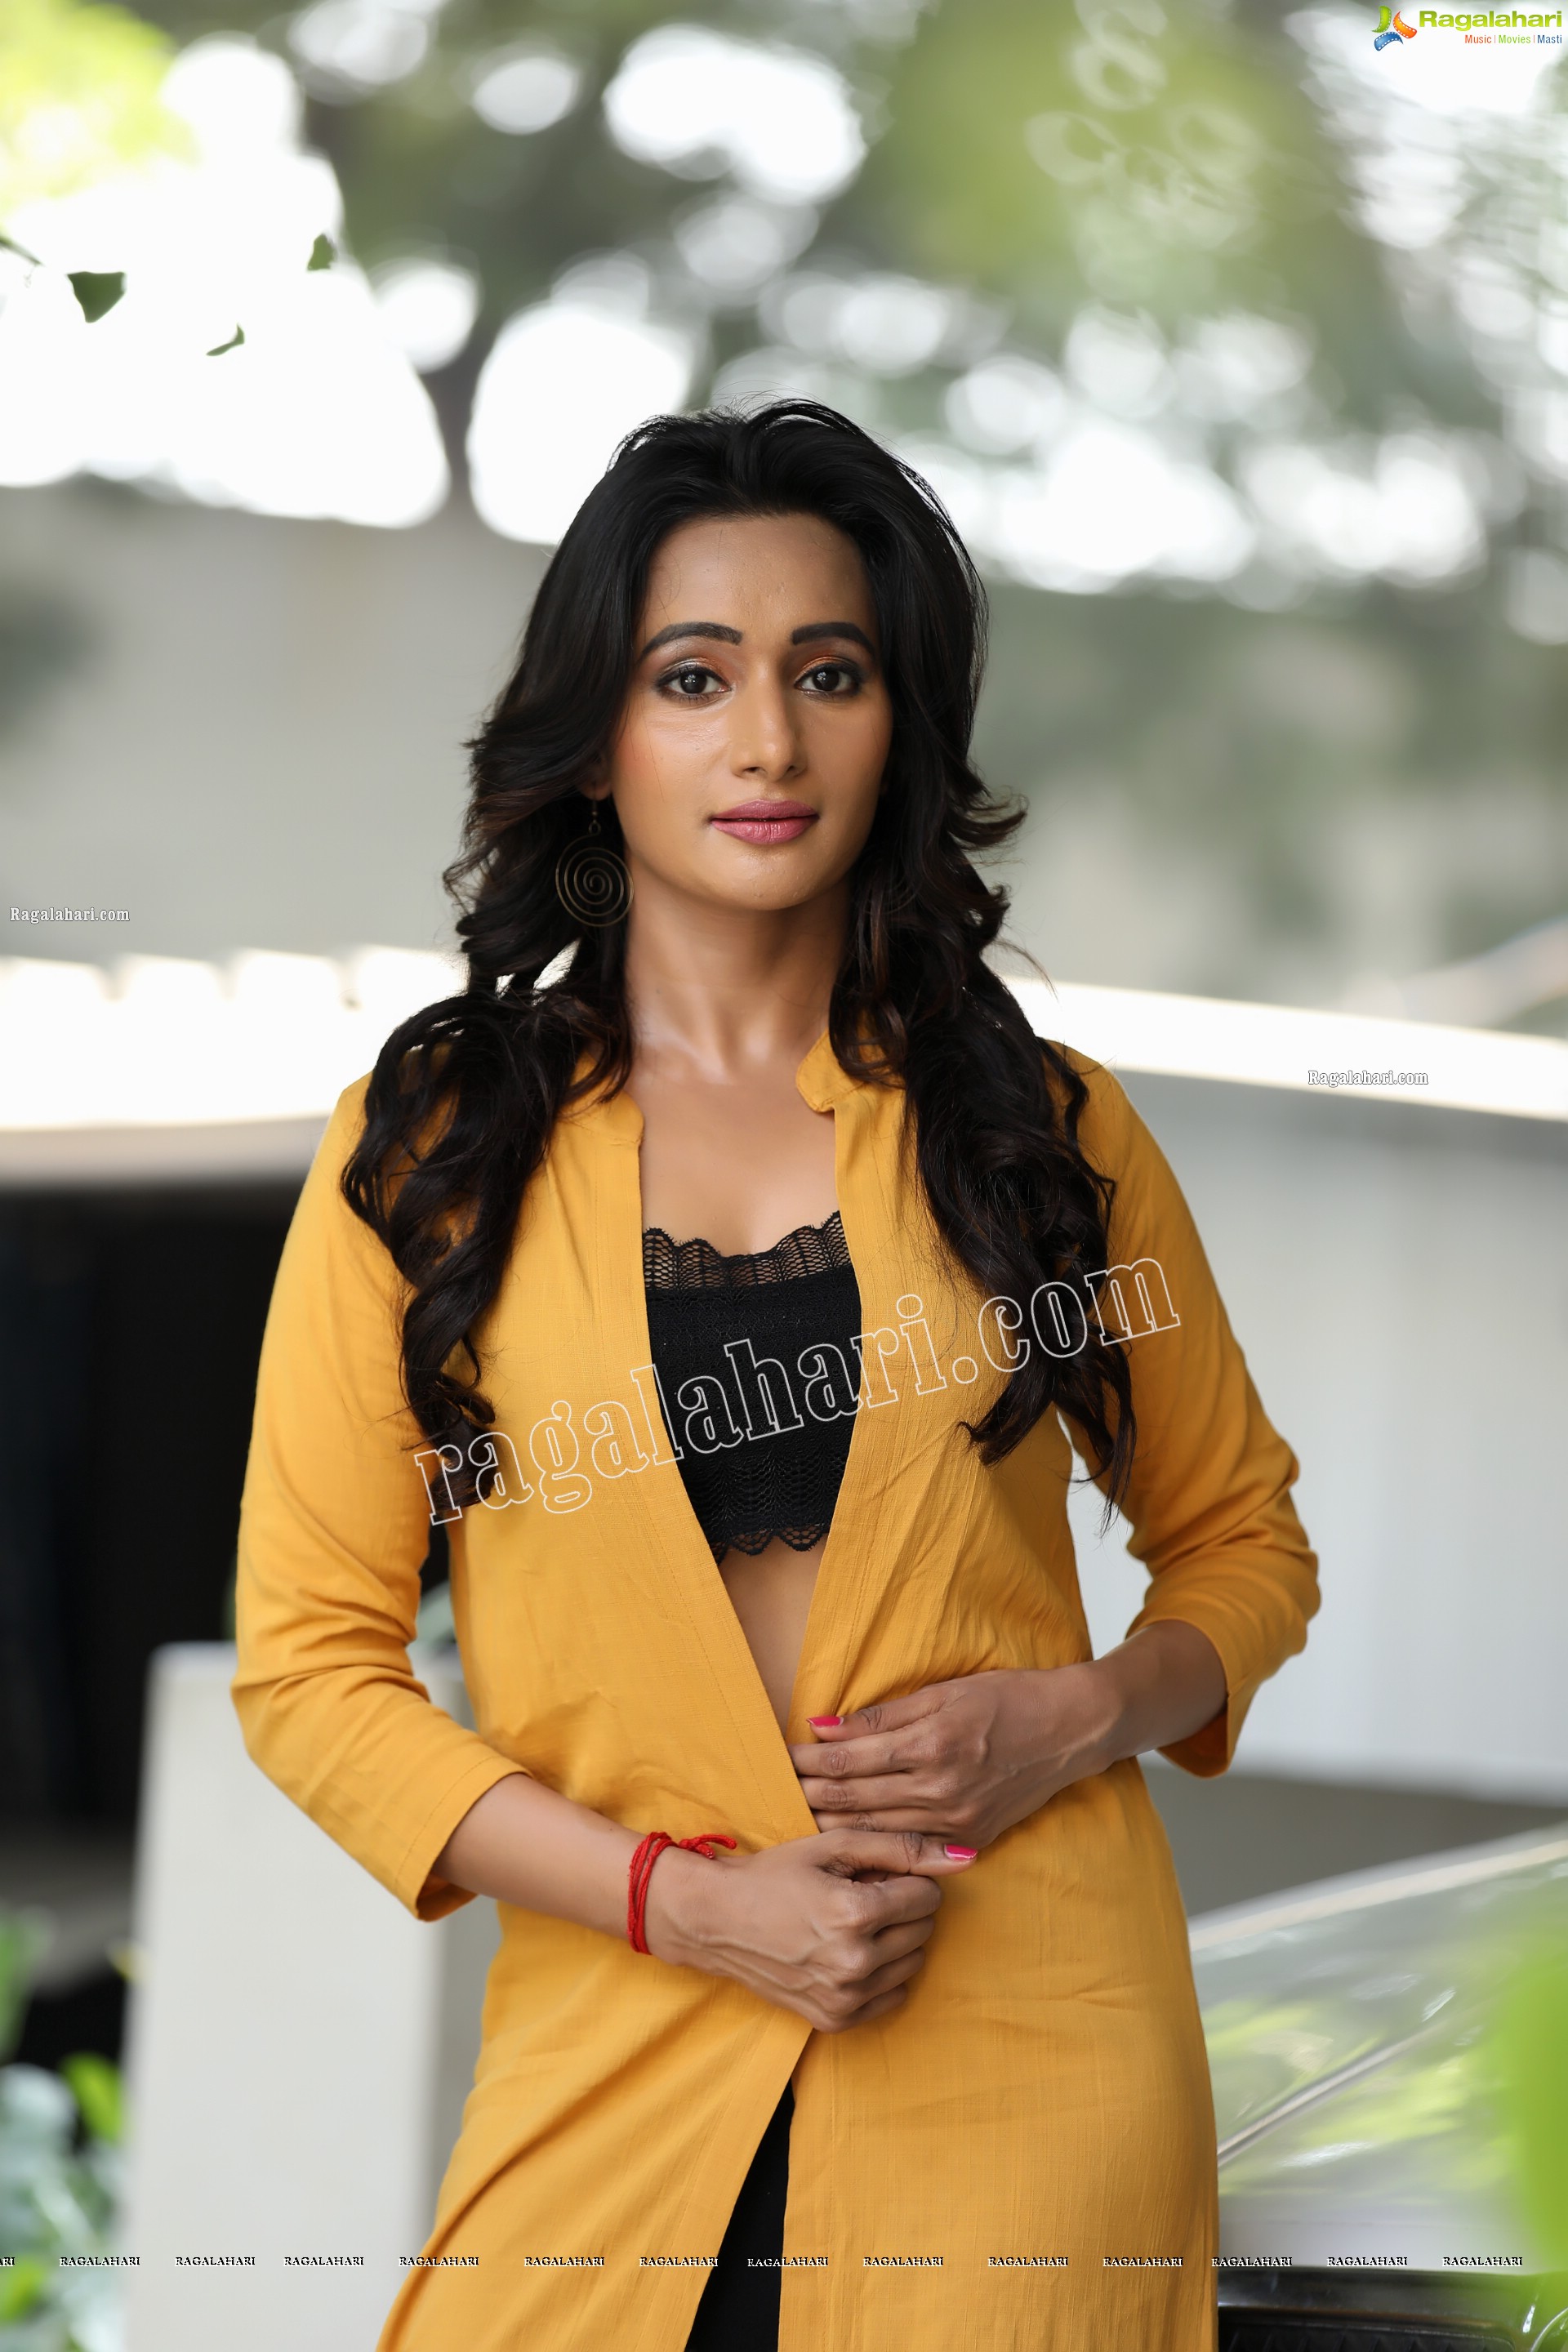 Nisheetha in Yellow Long Shrug and Black Pant Exclusive Photo Shoot